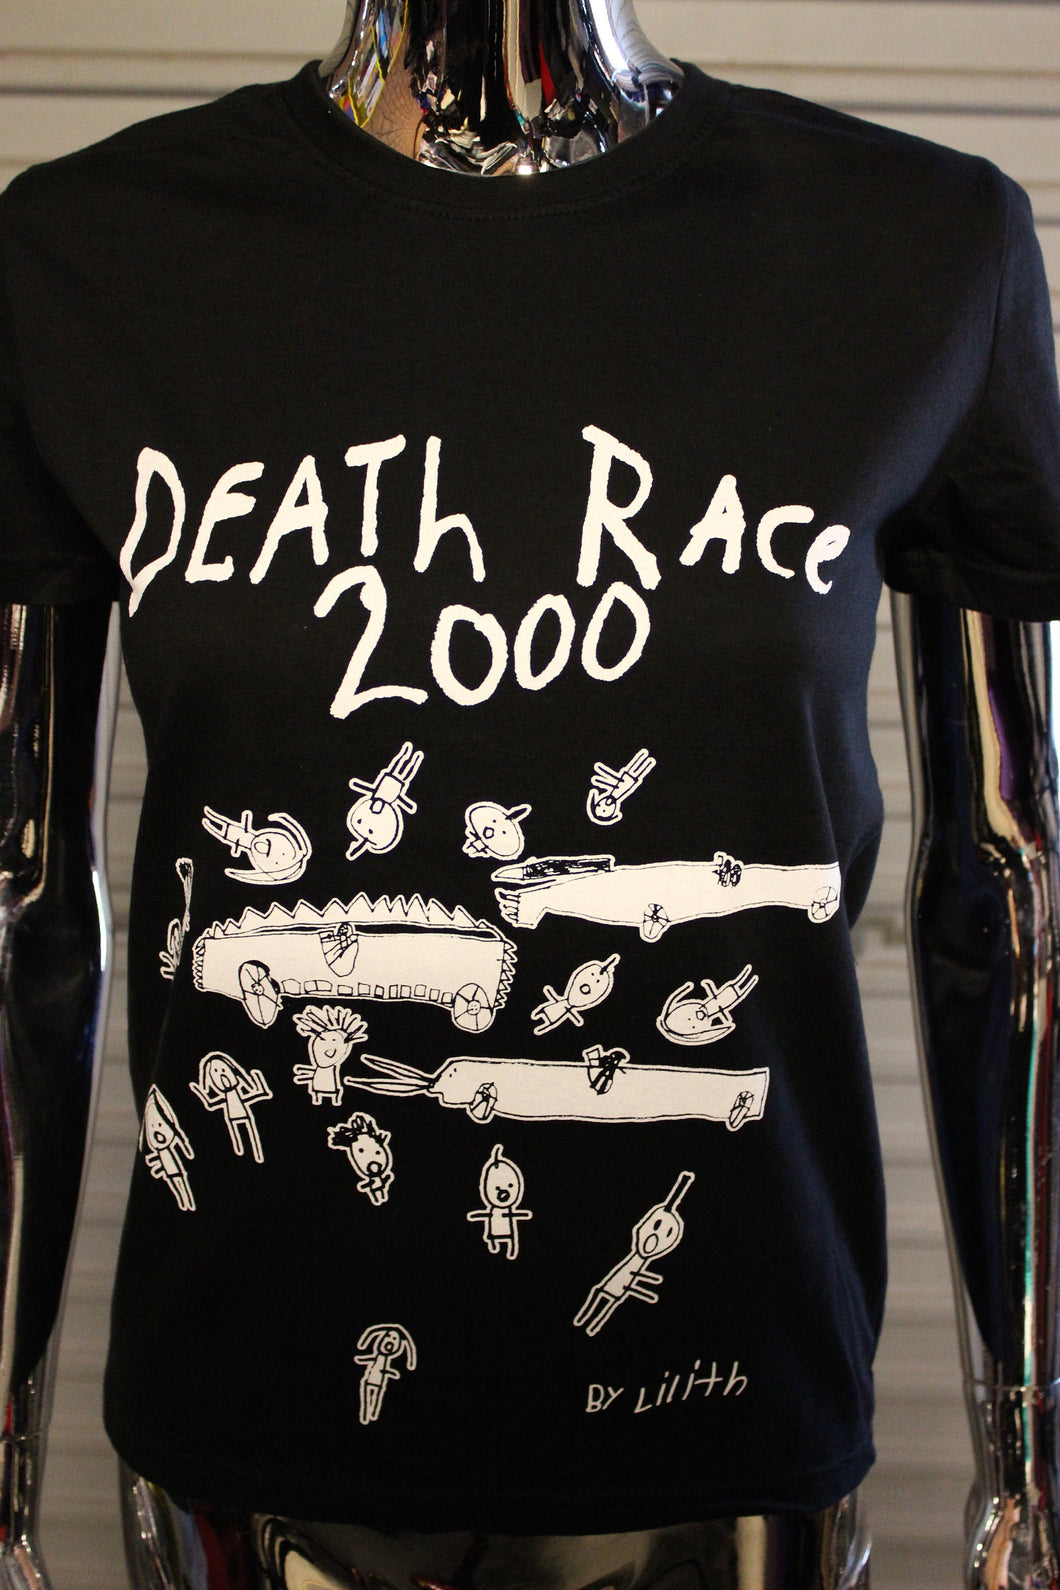 Women's Death Race 2000 by Lilith t-shirt